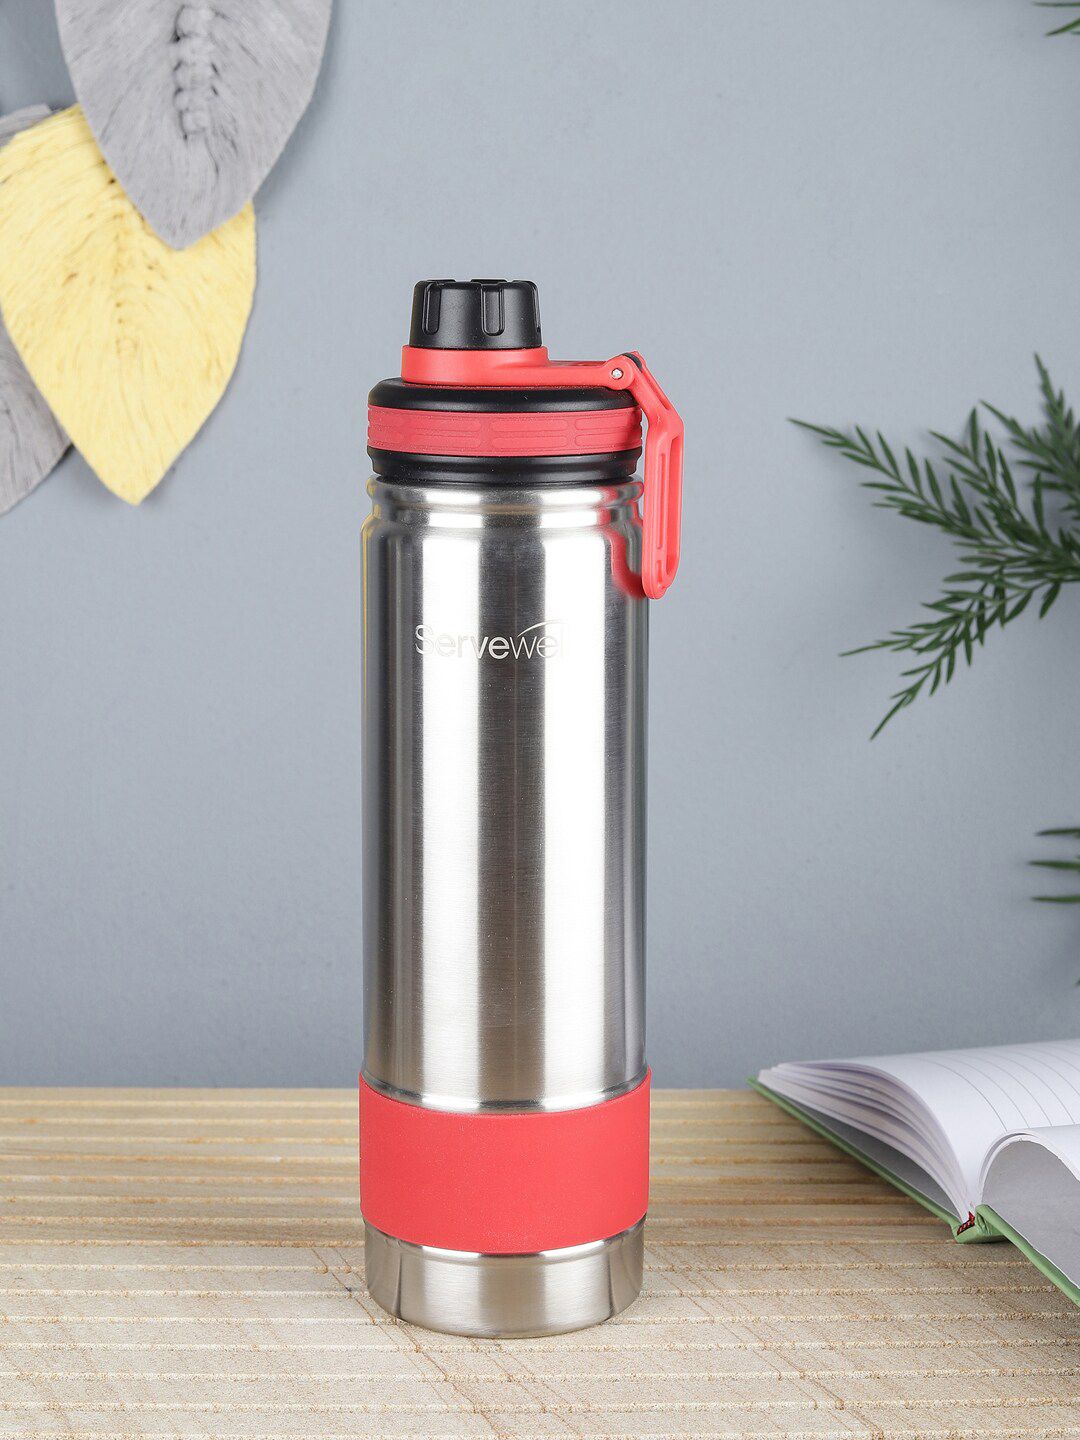 Servewell Silver-Toned & Red Thunder Stainless Steel Vacuum Bottle 700 ml Price in India